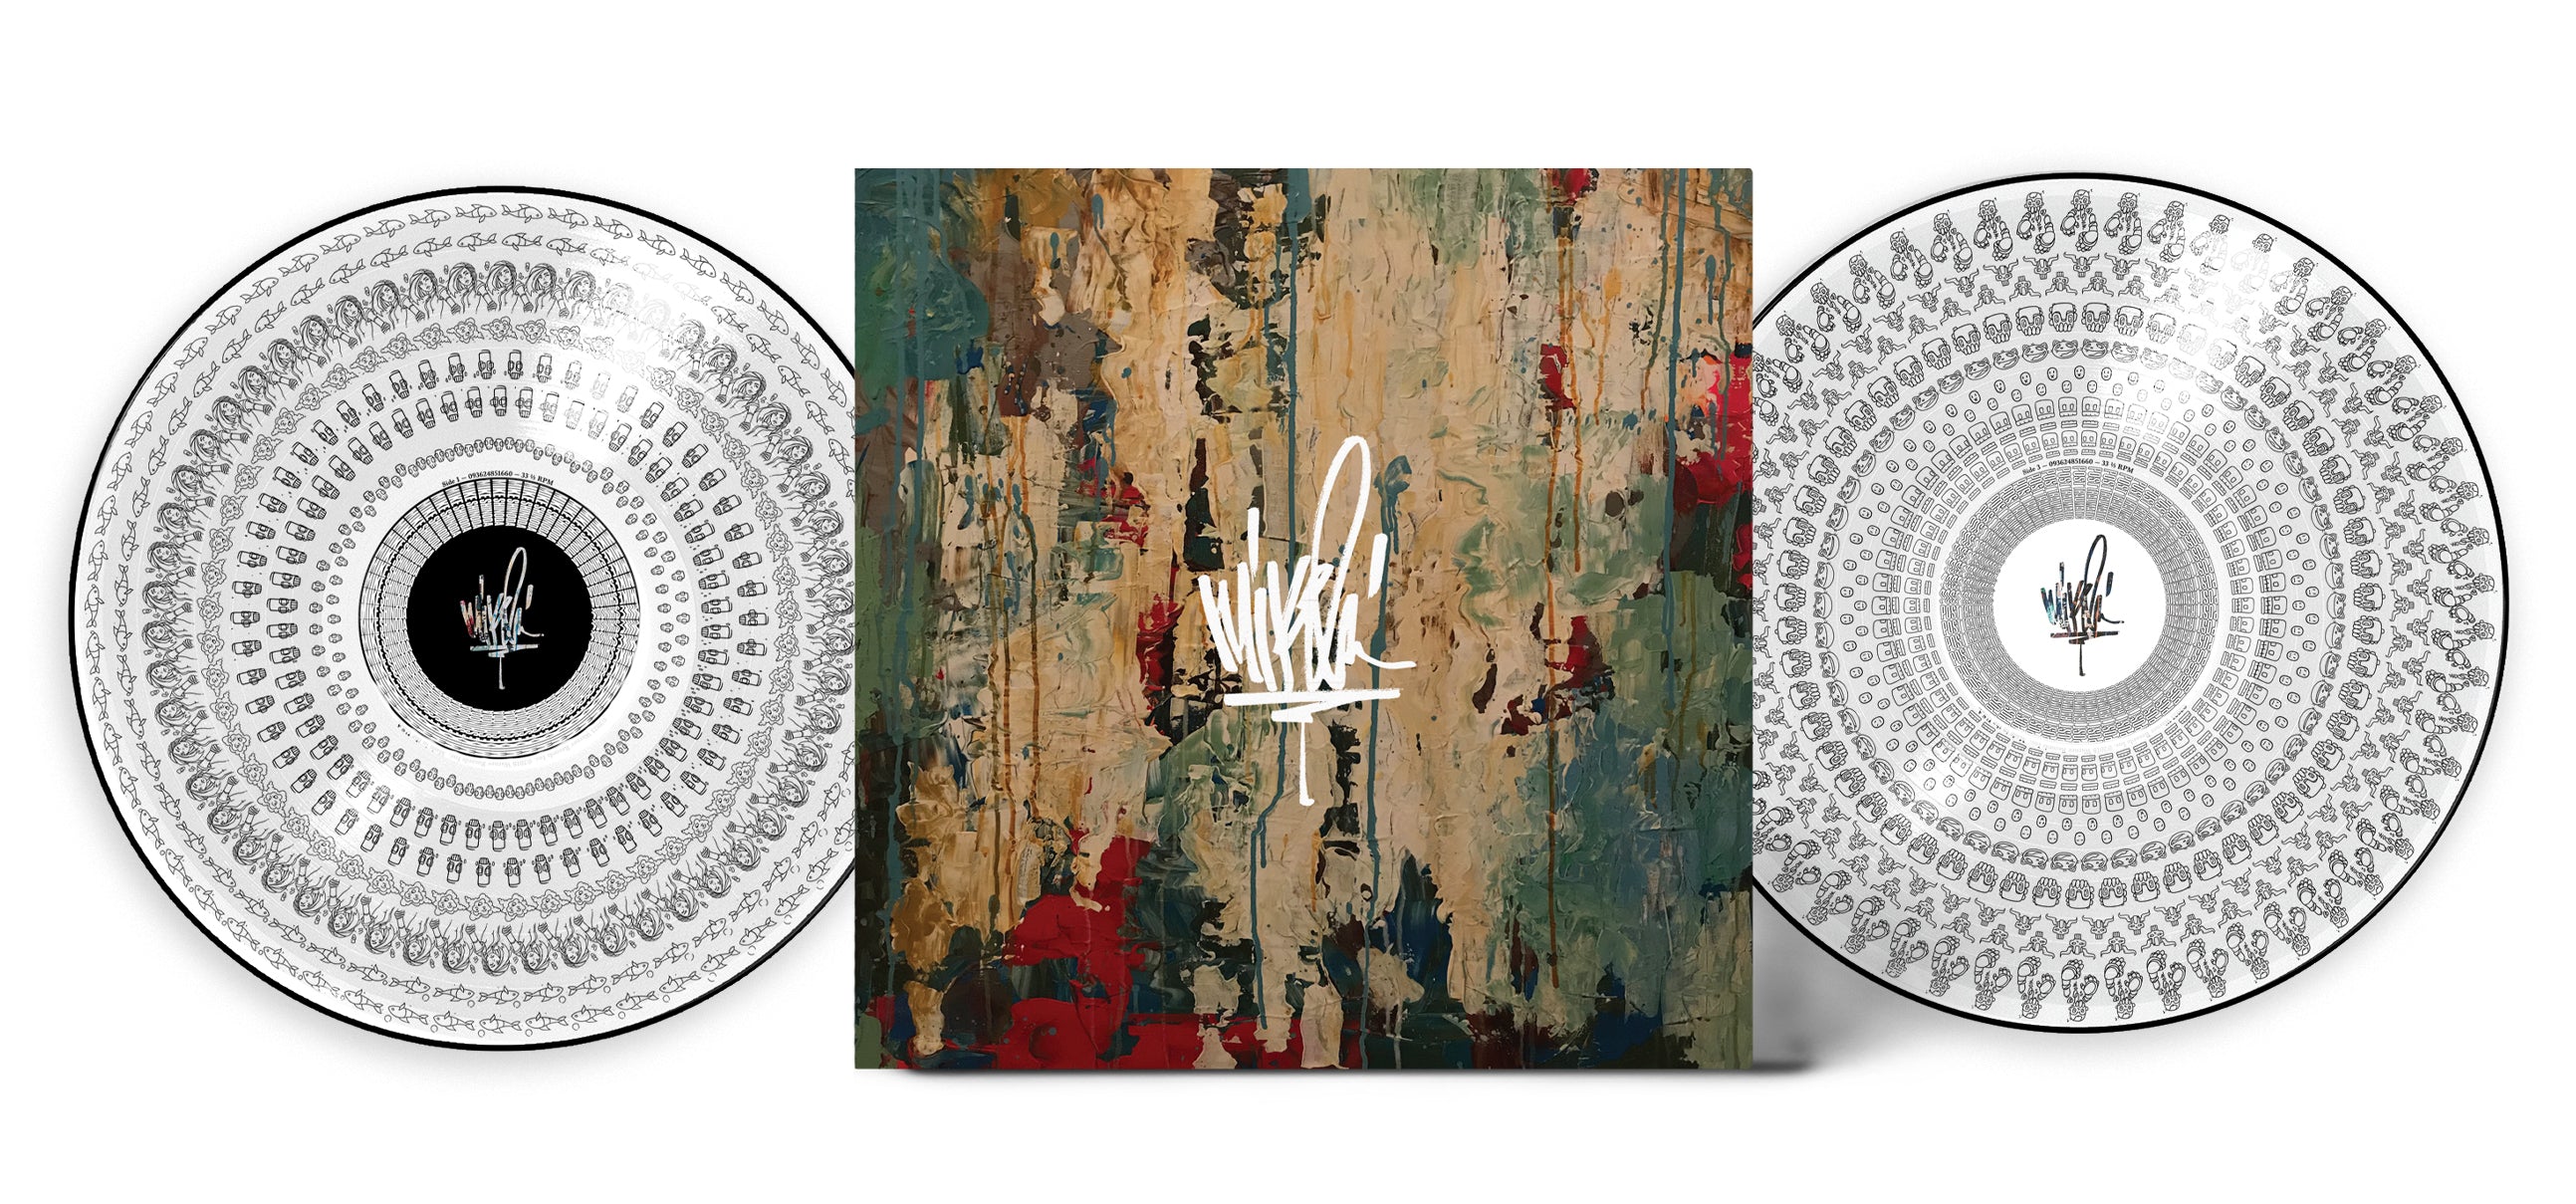 Mike Shinoda- Post Traumatic (DLX Ed) (Indie Exclusive) (Zoetrope) (PREORDER)